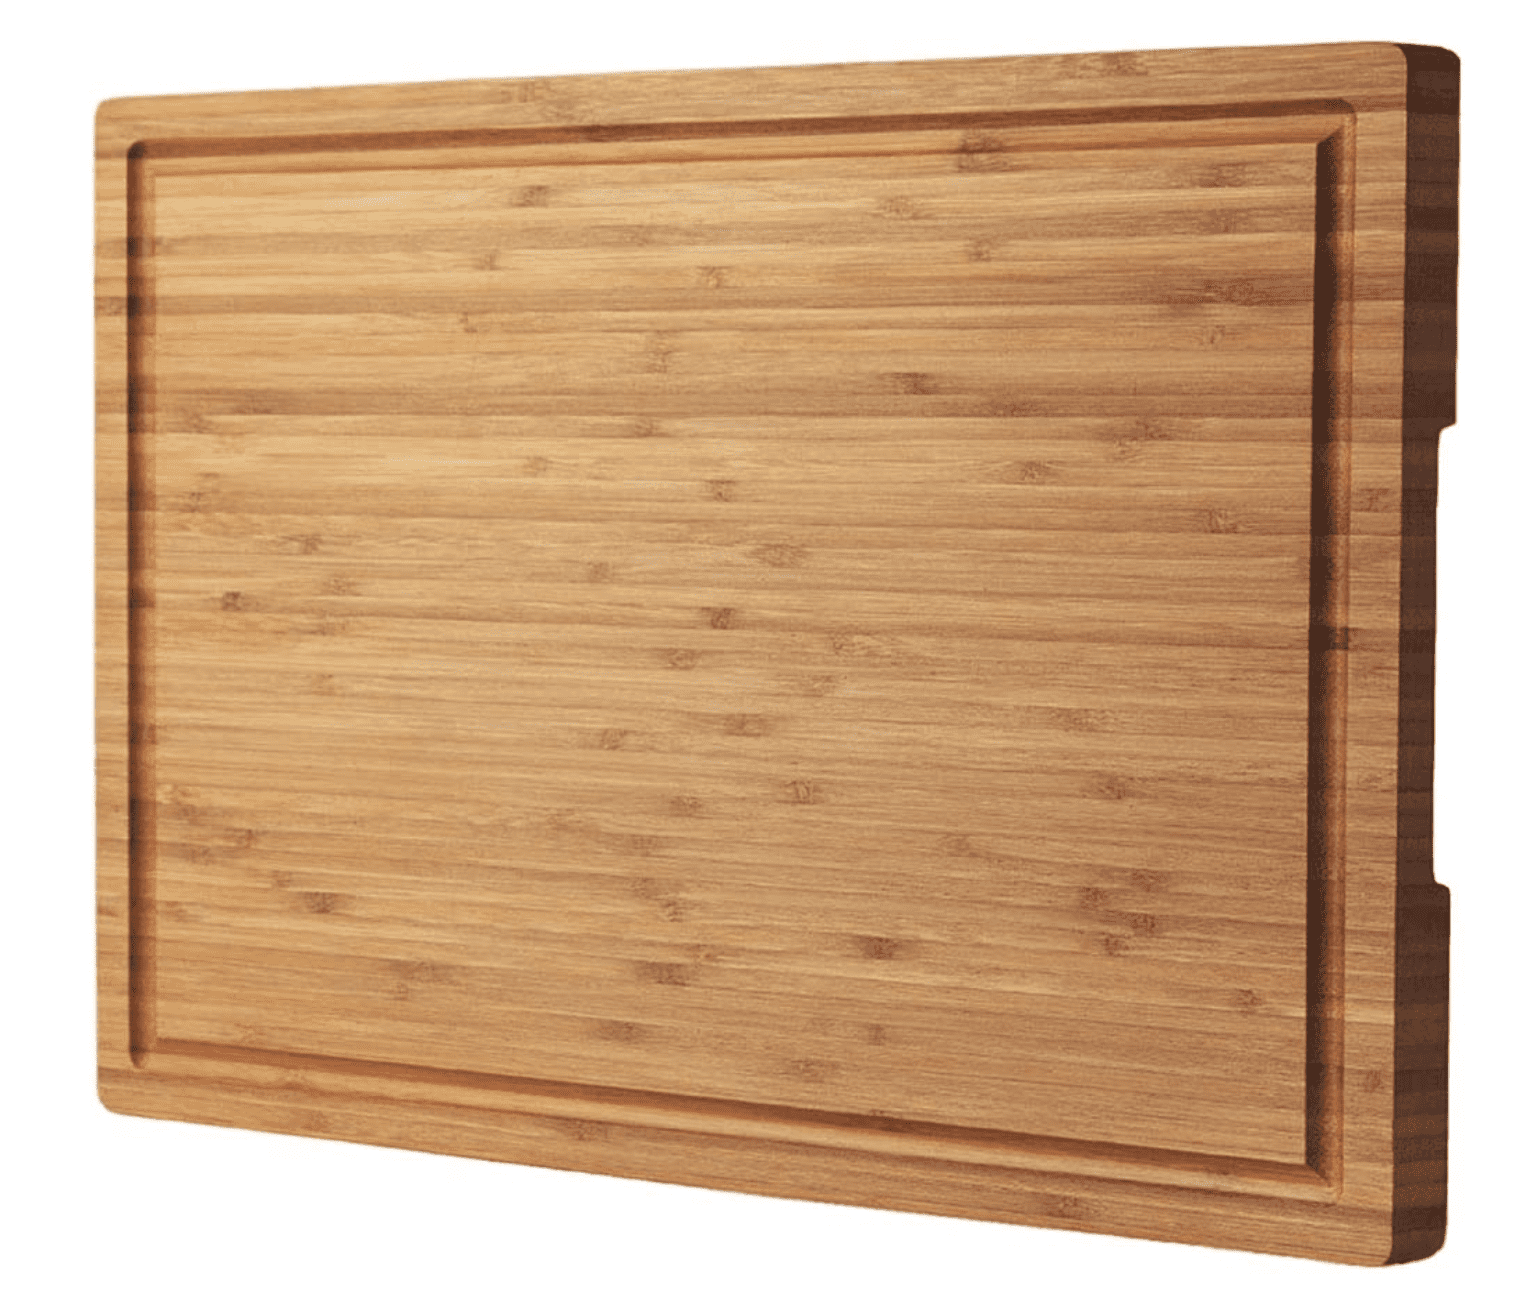 Which Type of Cutting Board is the Safest - Plastic or Wood?